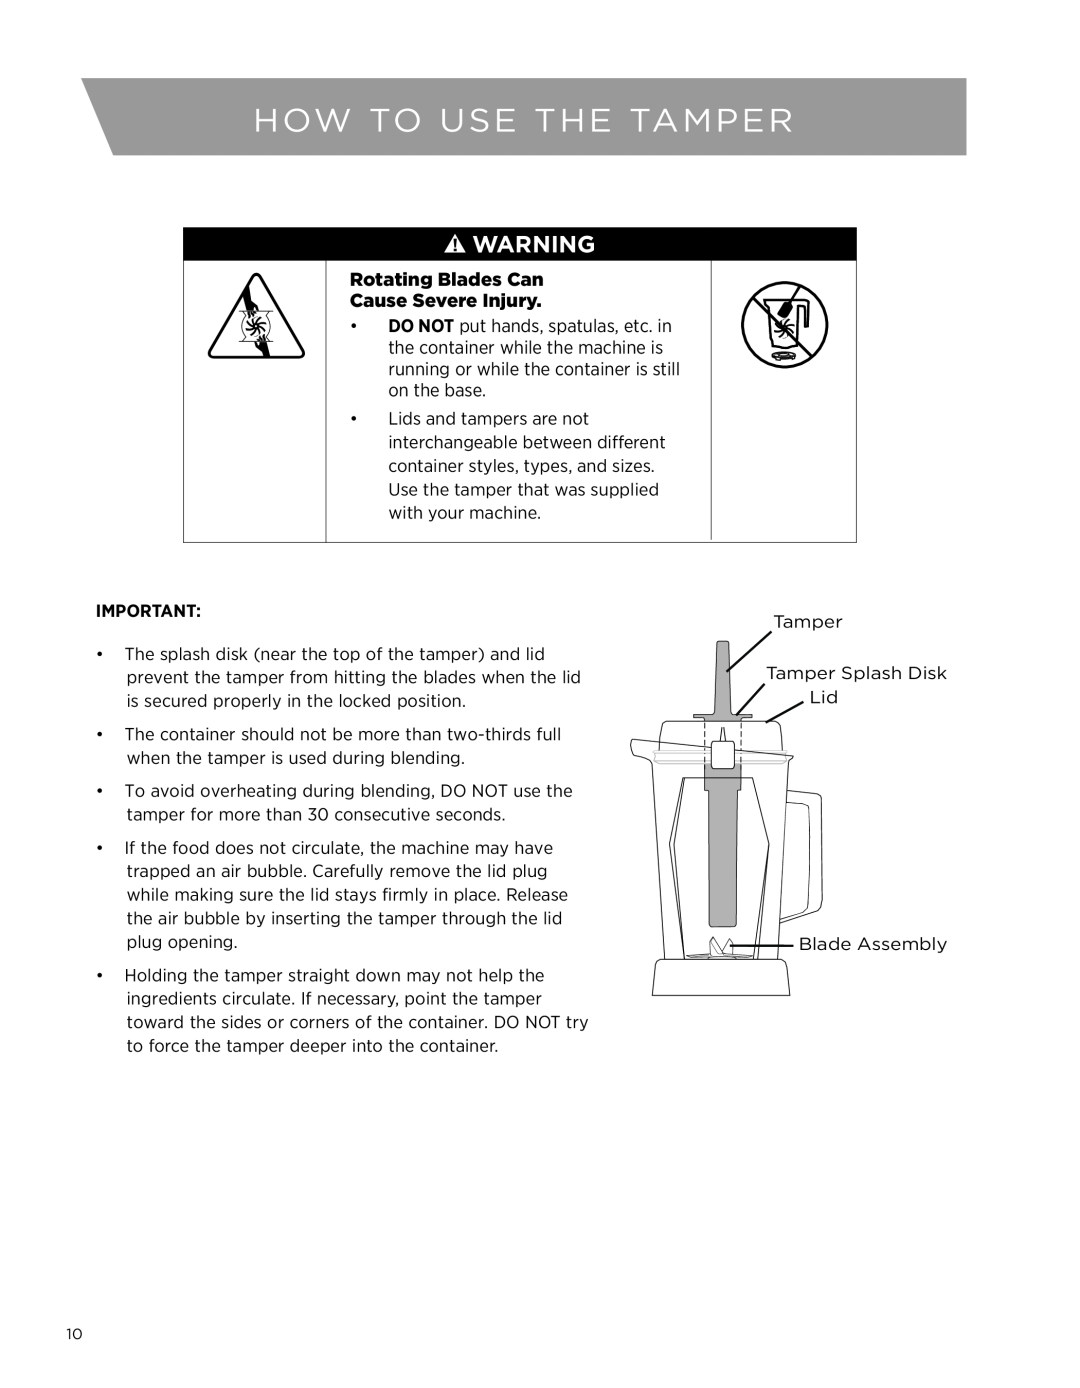 Vita-Mix 7500 owner manual How To Use The Tamper, Rotating Blades Can Cause Severe Injury 